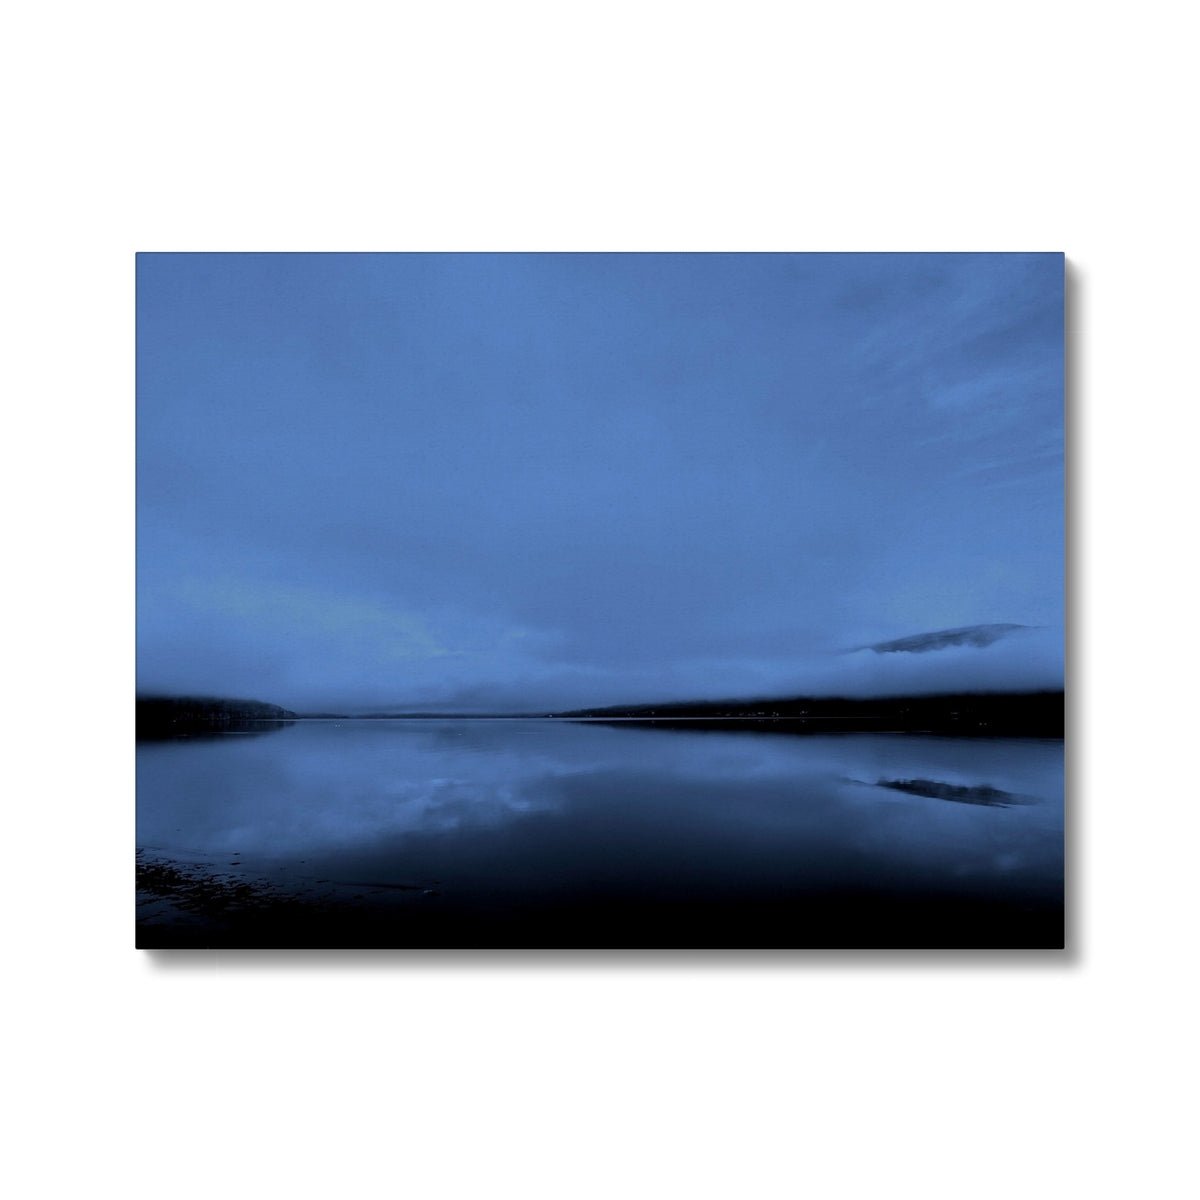 The Blue Hour Loch Fyne Painting | Canvas From Scotland-Contemporary Stretched Canvas Prints-Scottish Lochs & Mountains Art Gallery-24"x18"-Paintings, Prints, Homeware, Art Gifts From Scotland By Scottish Artist Kevin Hunter